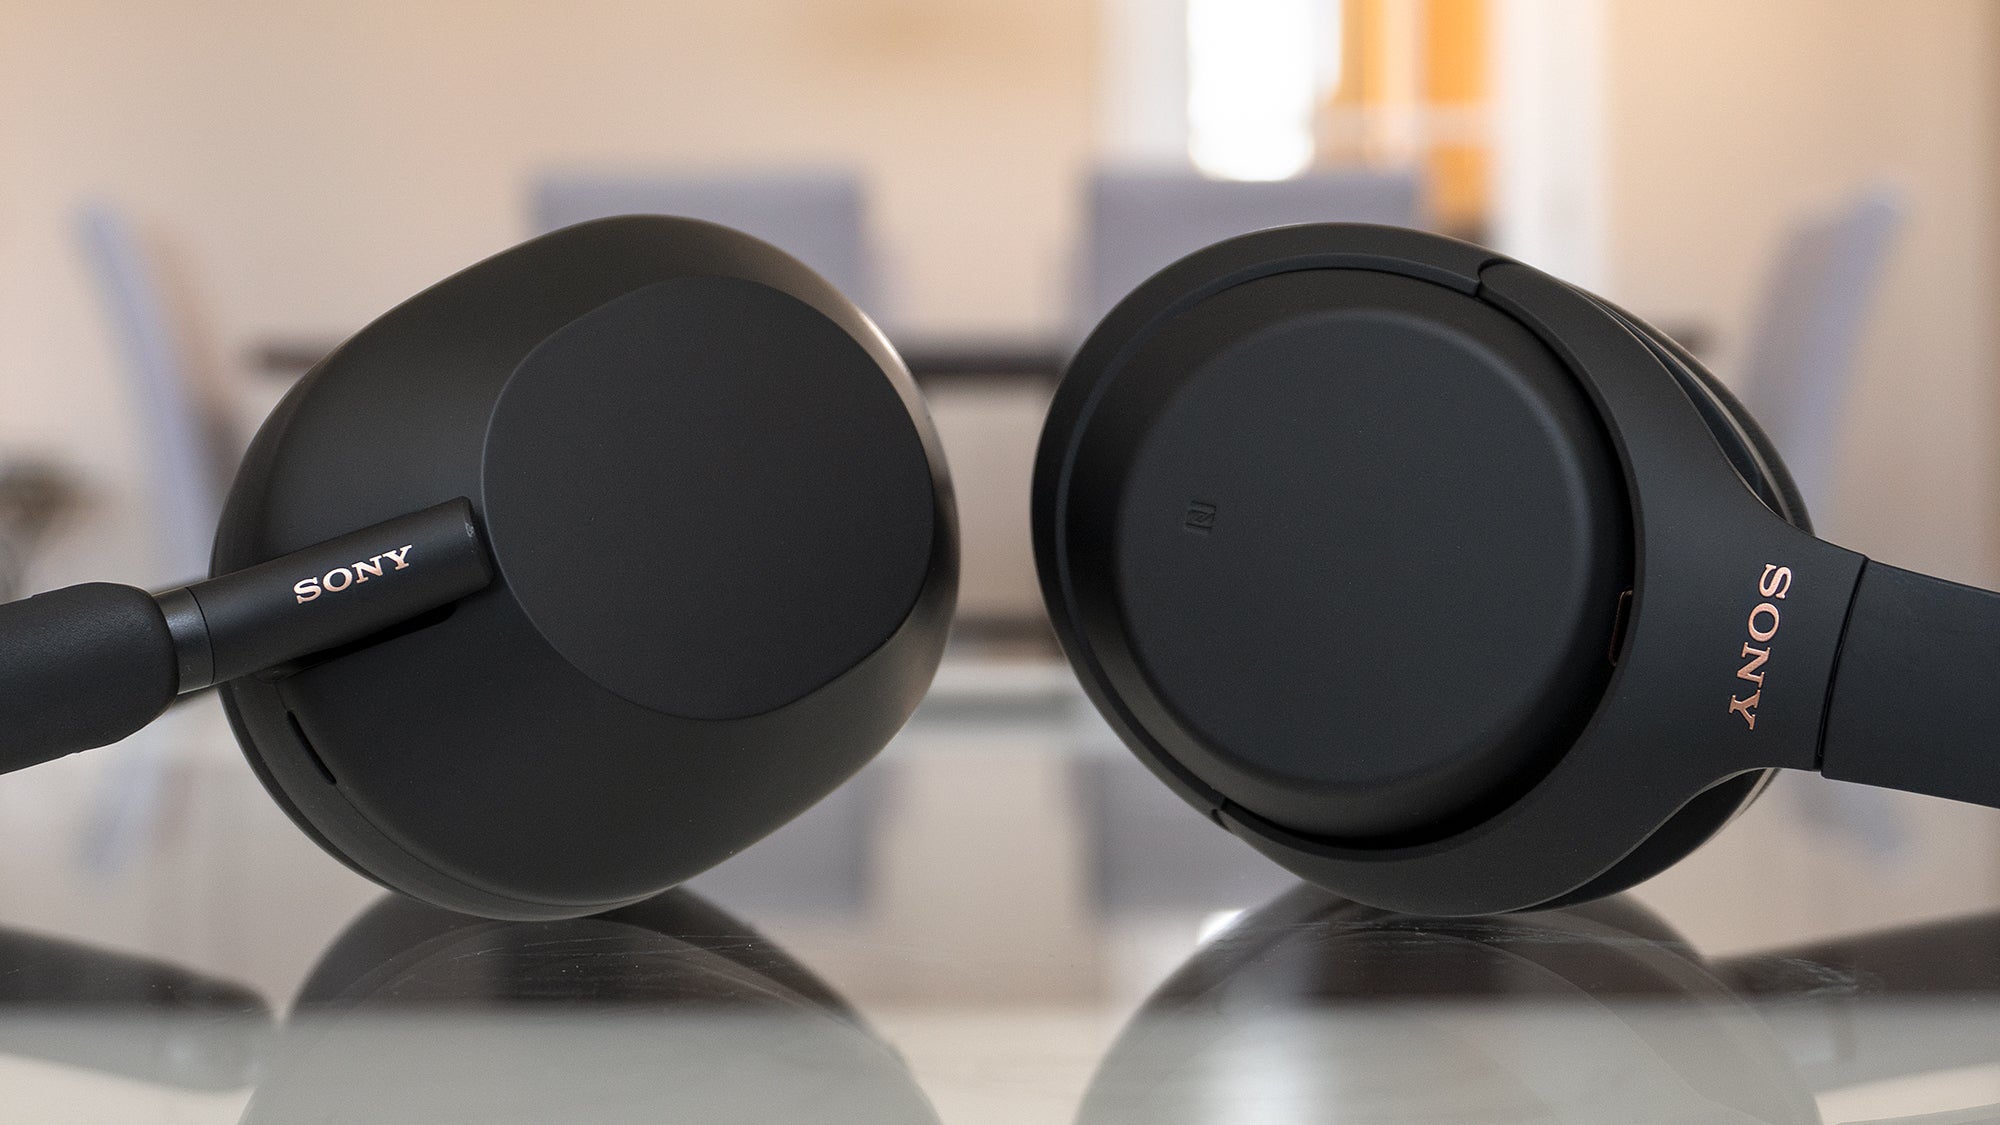 There's not a lot of reasons for fans of the Sony WH-1000XM4 (right) to upgrade to the new WH-1000XM5 (left), but as an overall package I do recommend them as a cheaper alternative to Apple's pricy AirPods Max. (Photo: Andrew Liszewski - Gizmodo)